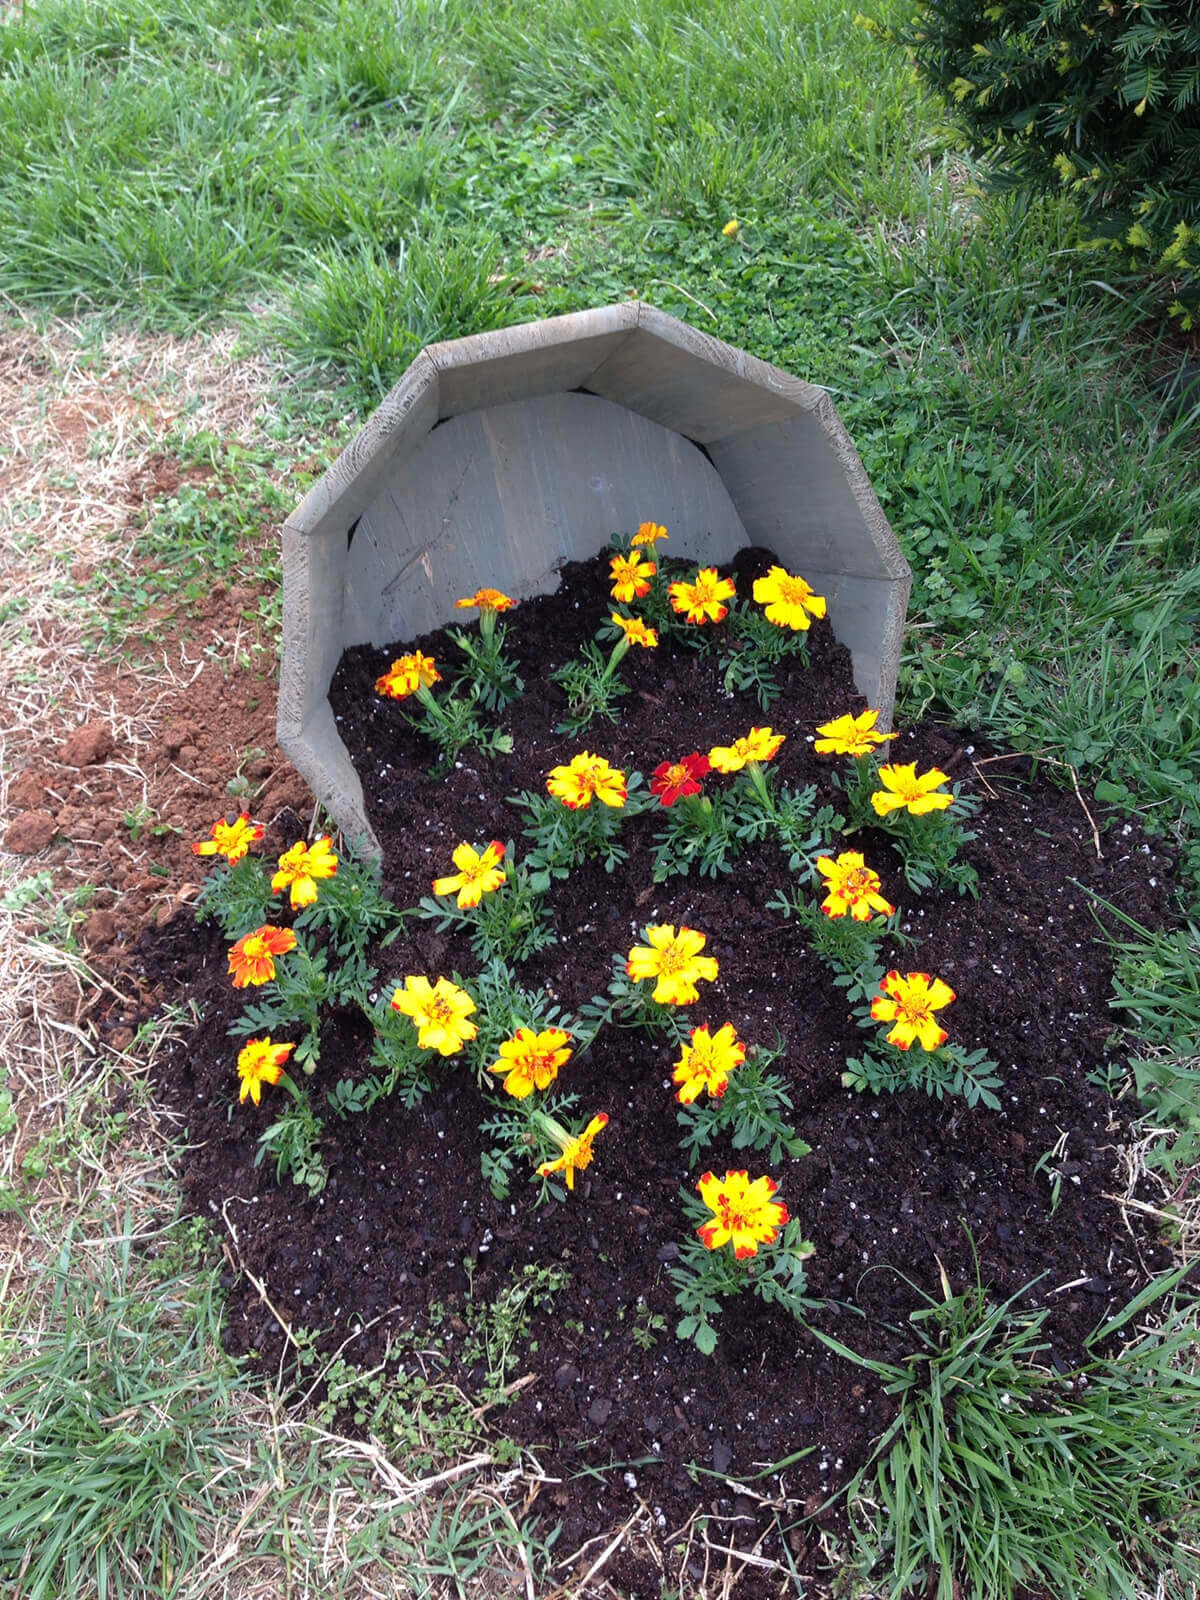 Marigolds Popping out of their Planter